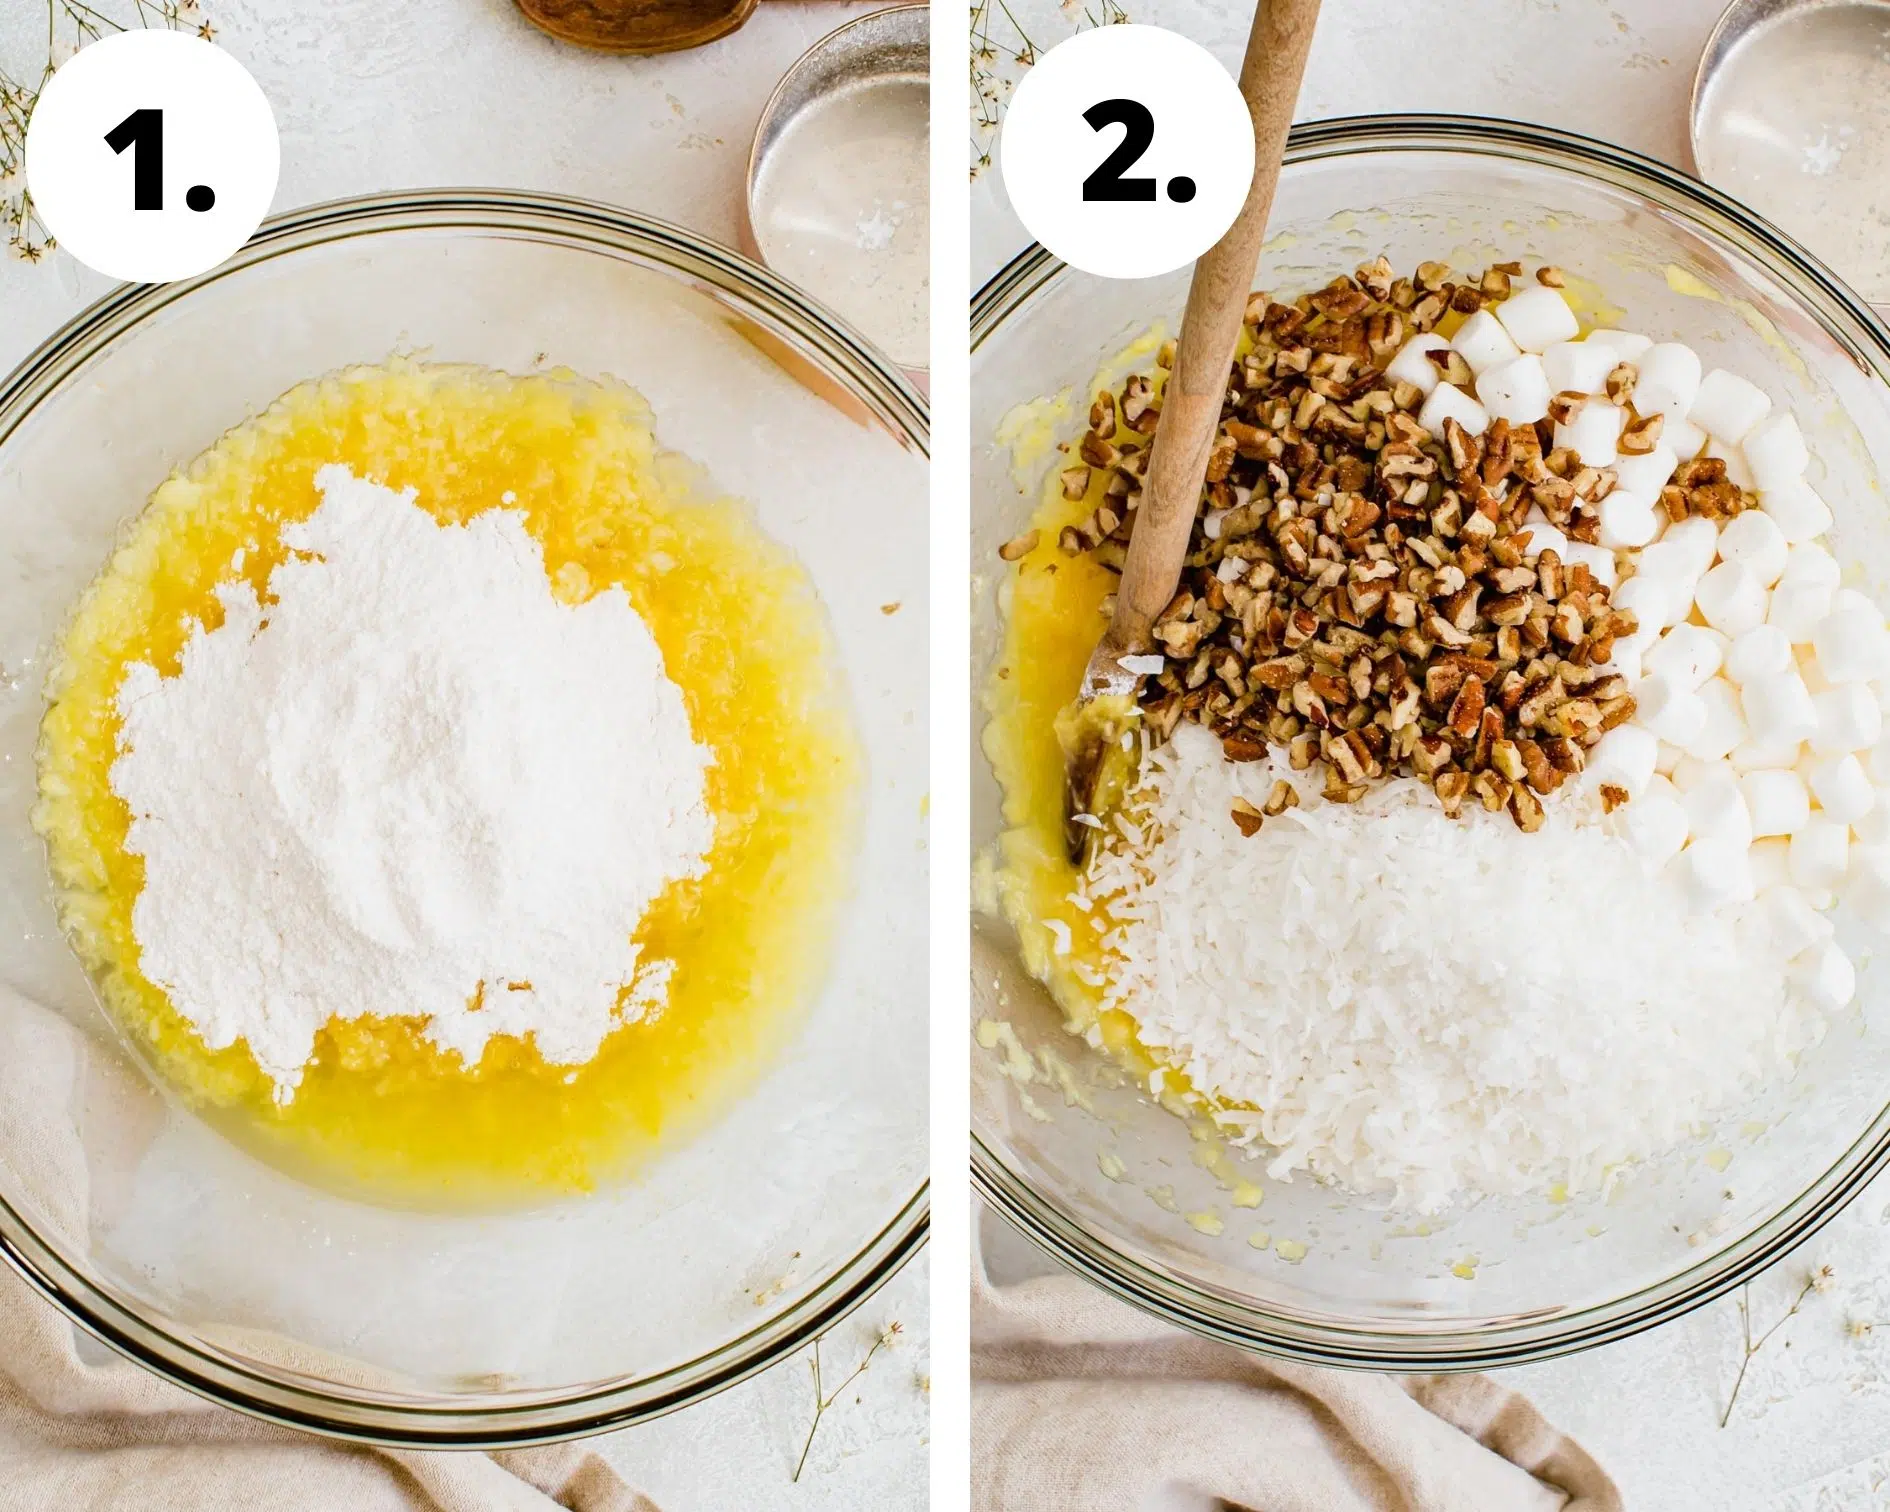 Pineapple fluff process steps 1 and 2.